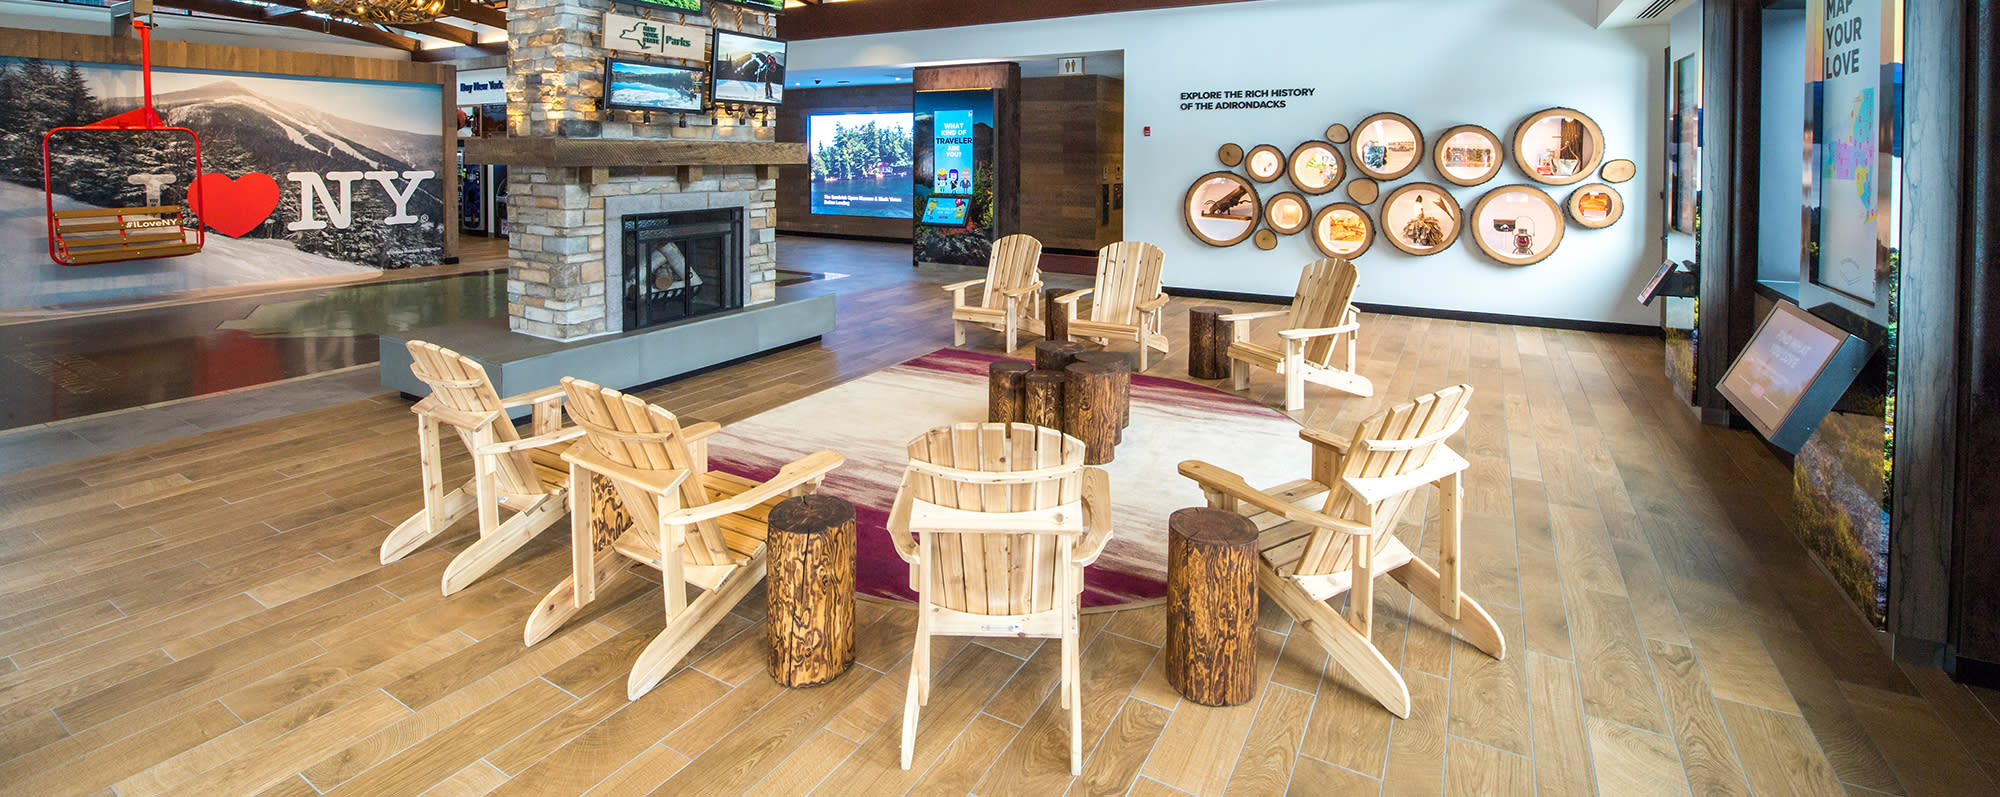 Adirondack chairs and a fireplace on display at the Adirondack Welcome Center on North side of Route I 87